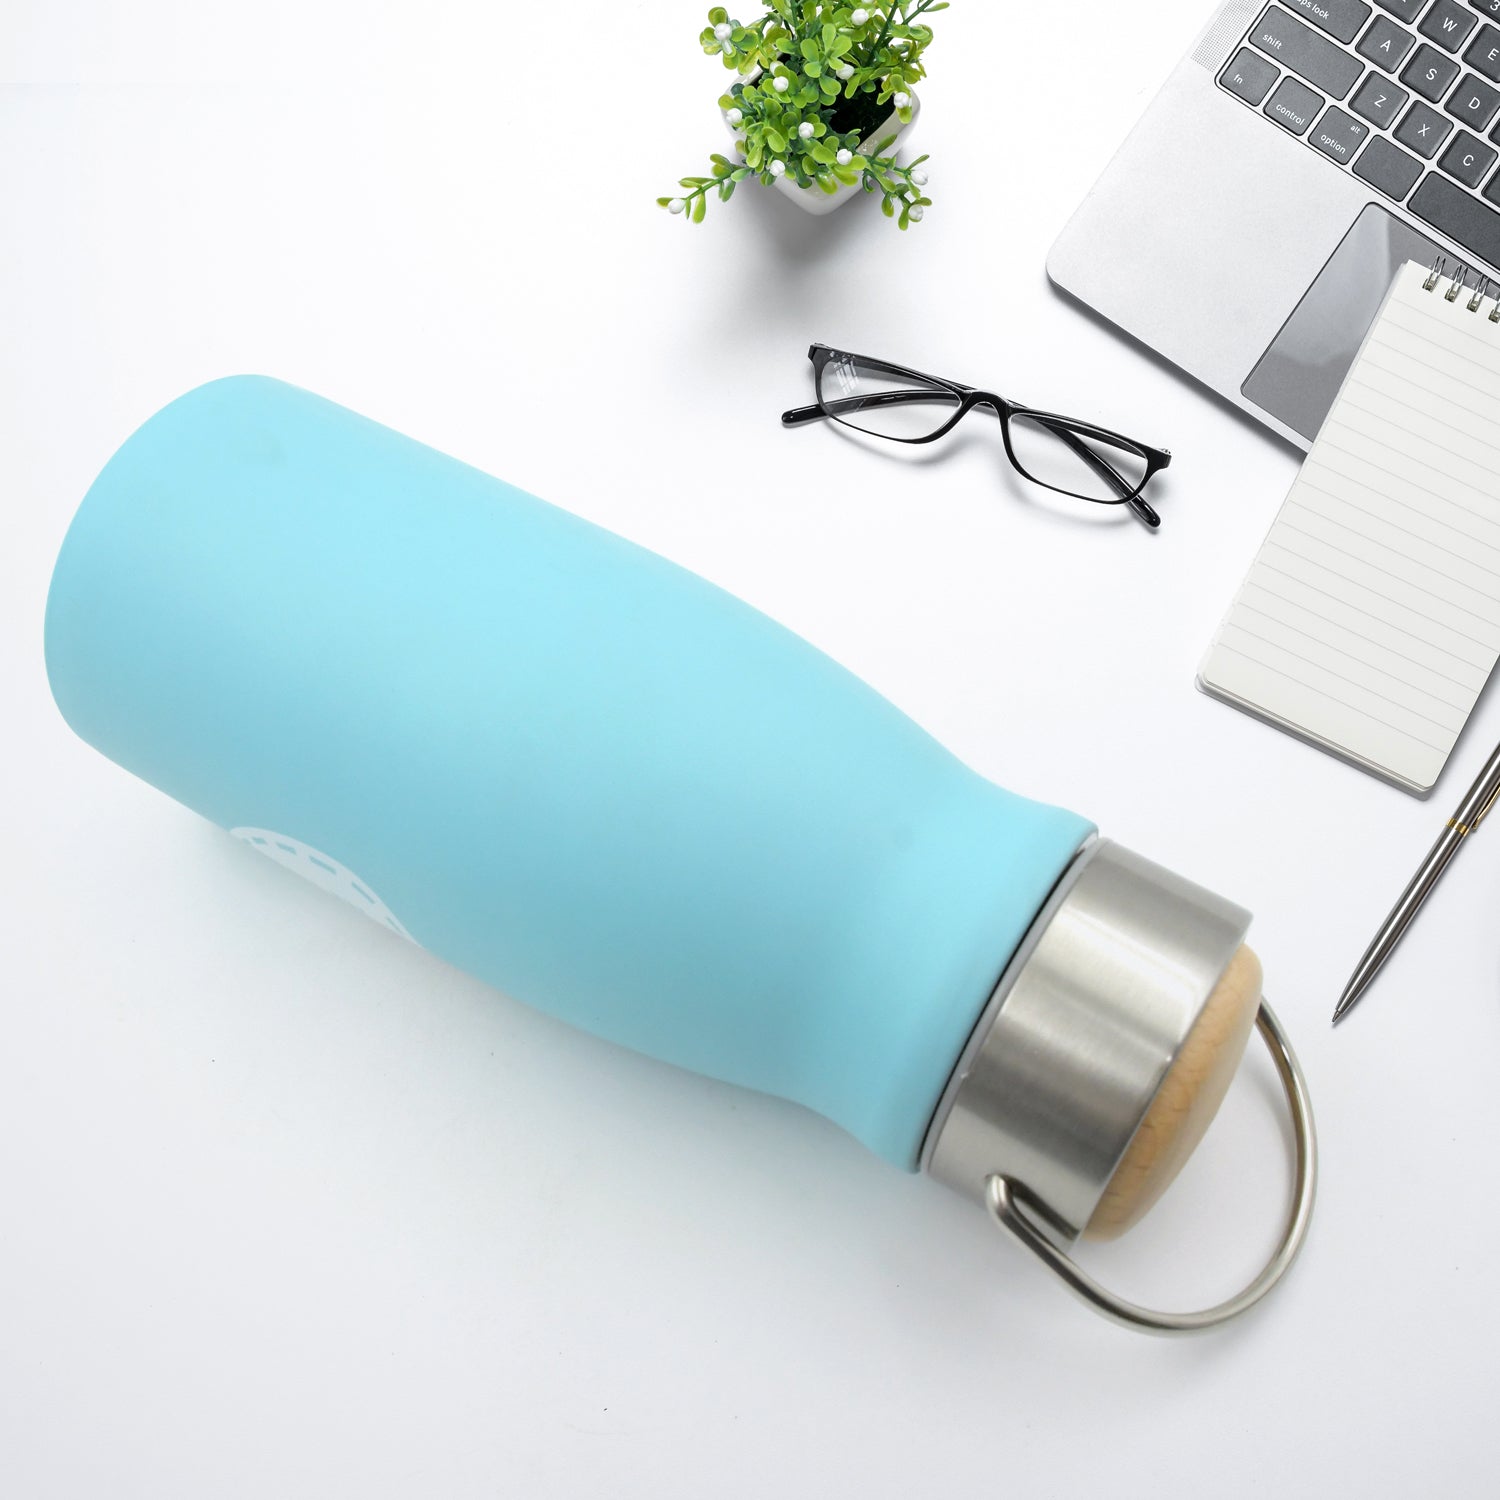 0285 Stainless Steel Water Bottle With Handle, Fridge Water Bottle, Stainless Steel Water Bottle Leak Proof, Rust Proof, Hot & Cold Drinks, Gym Sipper BPA Free Food Grade Quality, Steel fridge Bottle For office/Gym/School (360 ML)